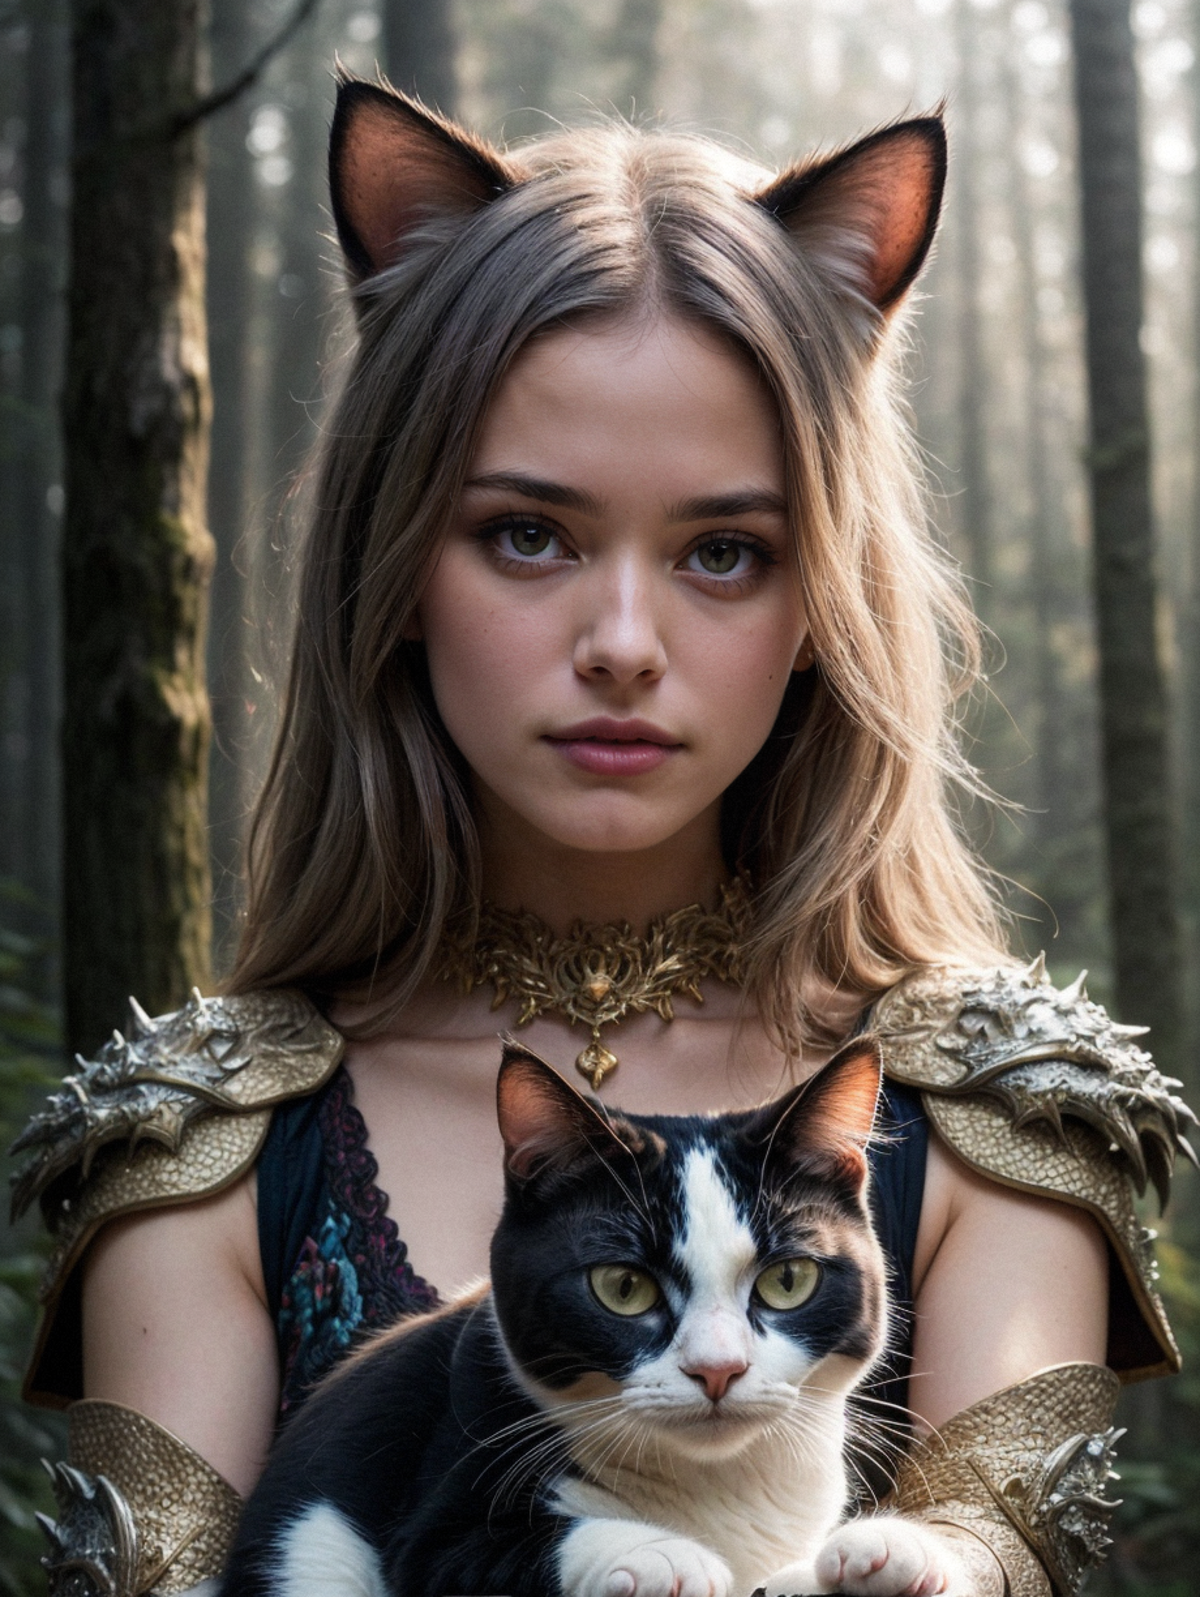 Woman in a forest with cat ears and holding a cat.